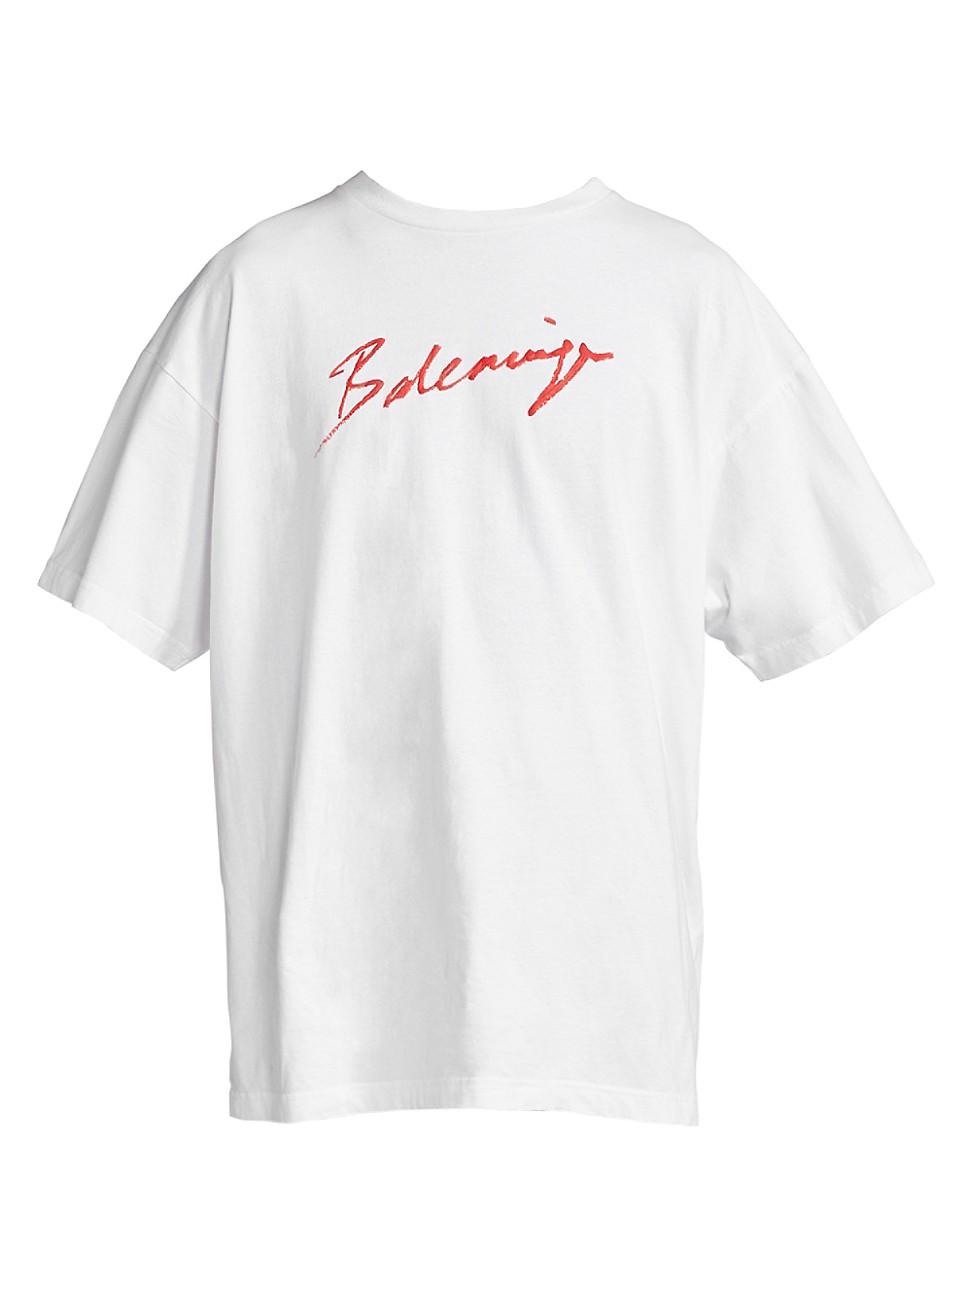 white shirt with red graphic